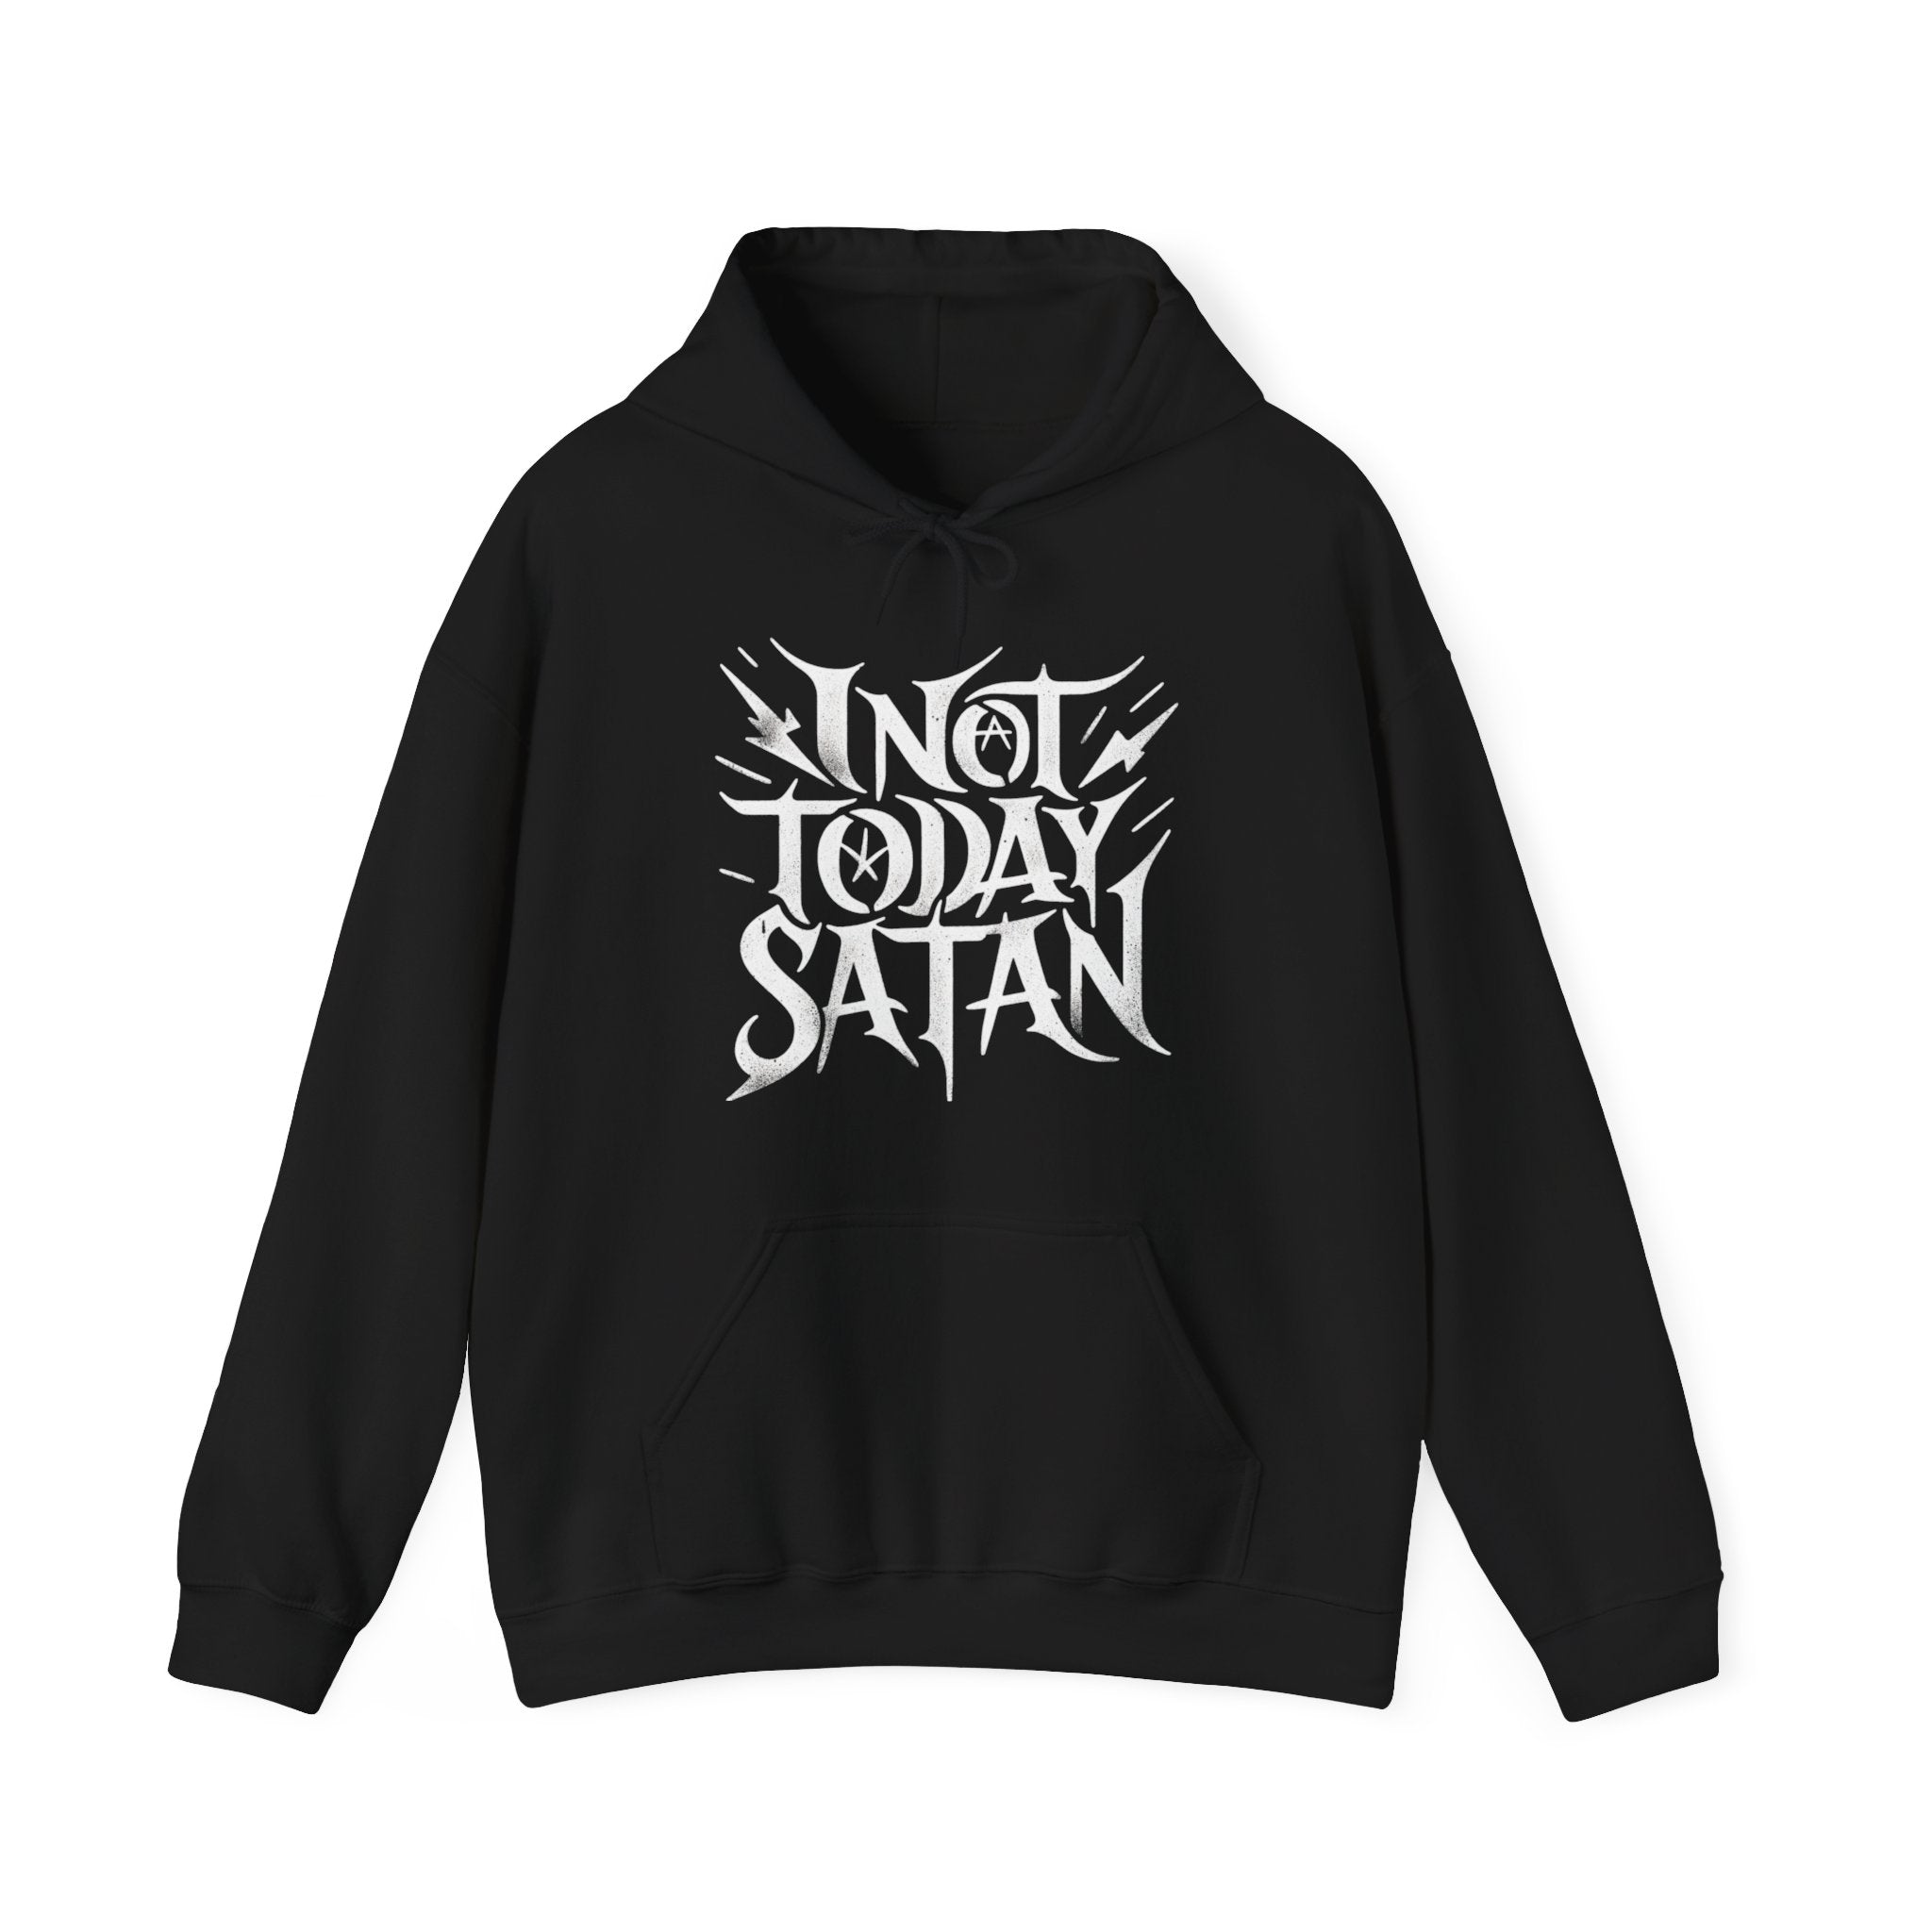 Not Today Satan - Hooded Sweatshirt with the phrase "NOT TODAY SATAN" in bold, stylized white lettering on the front, perfect for a bold casual look.